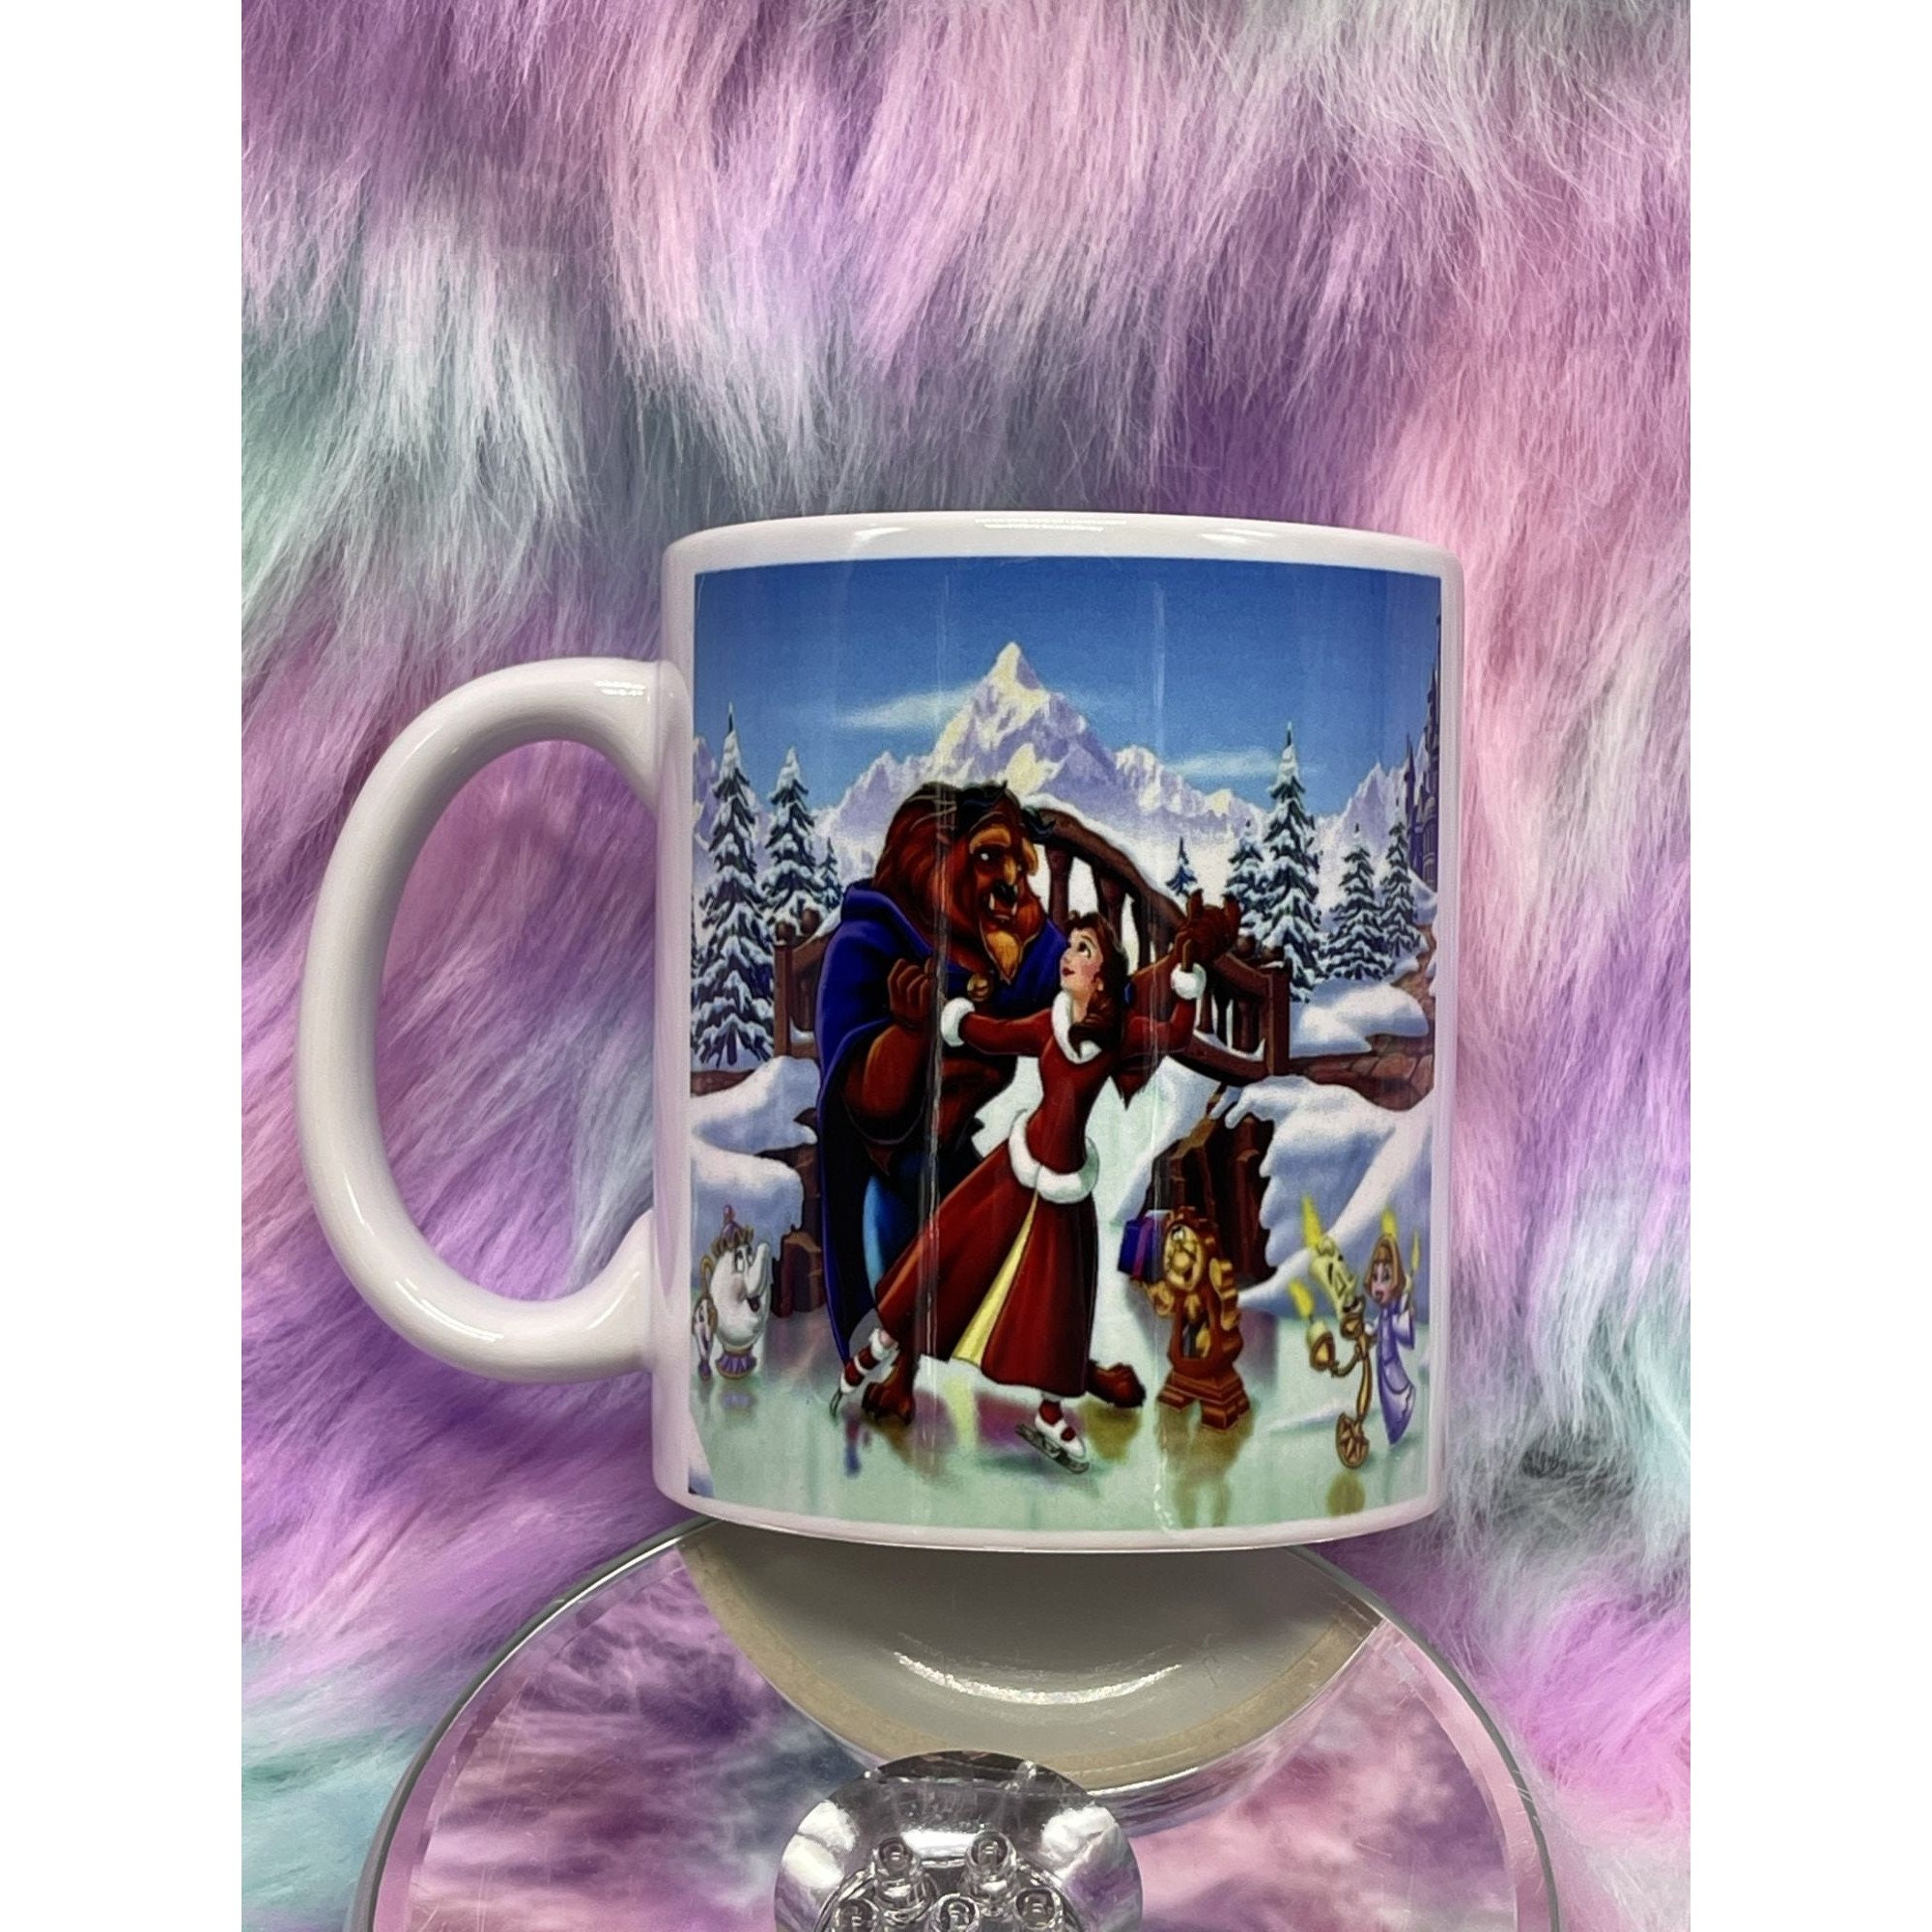 Belle - Beauty and the Beast Coffee Mug by Creative Chapps